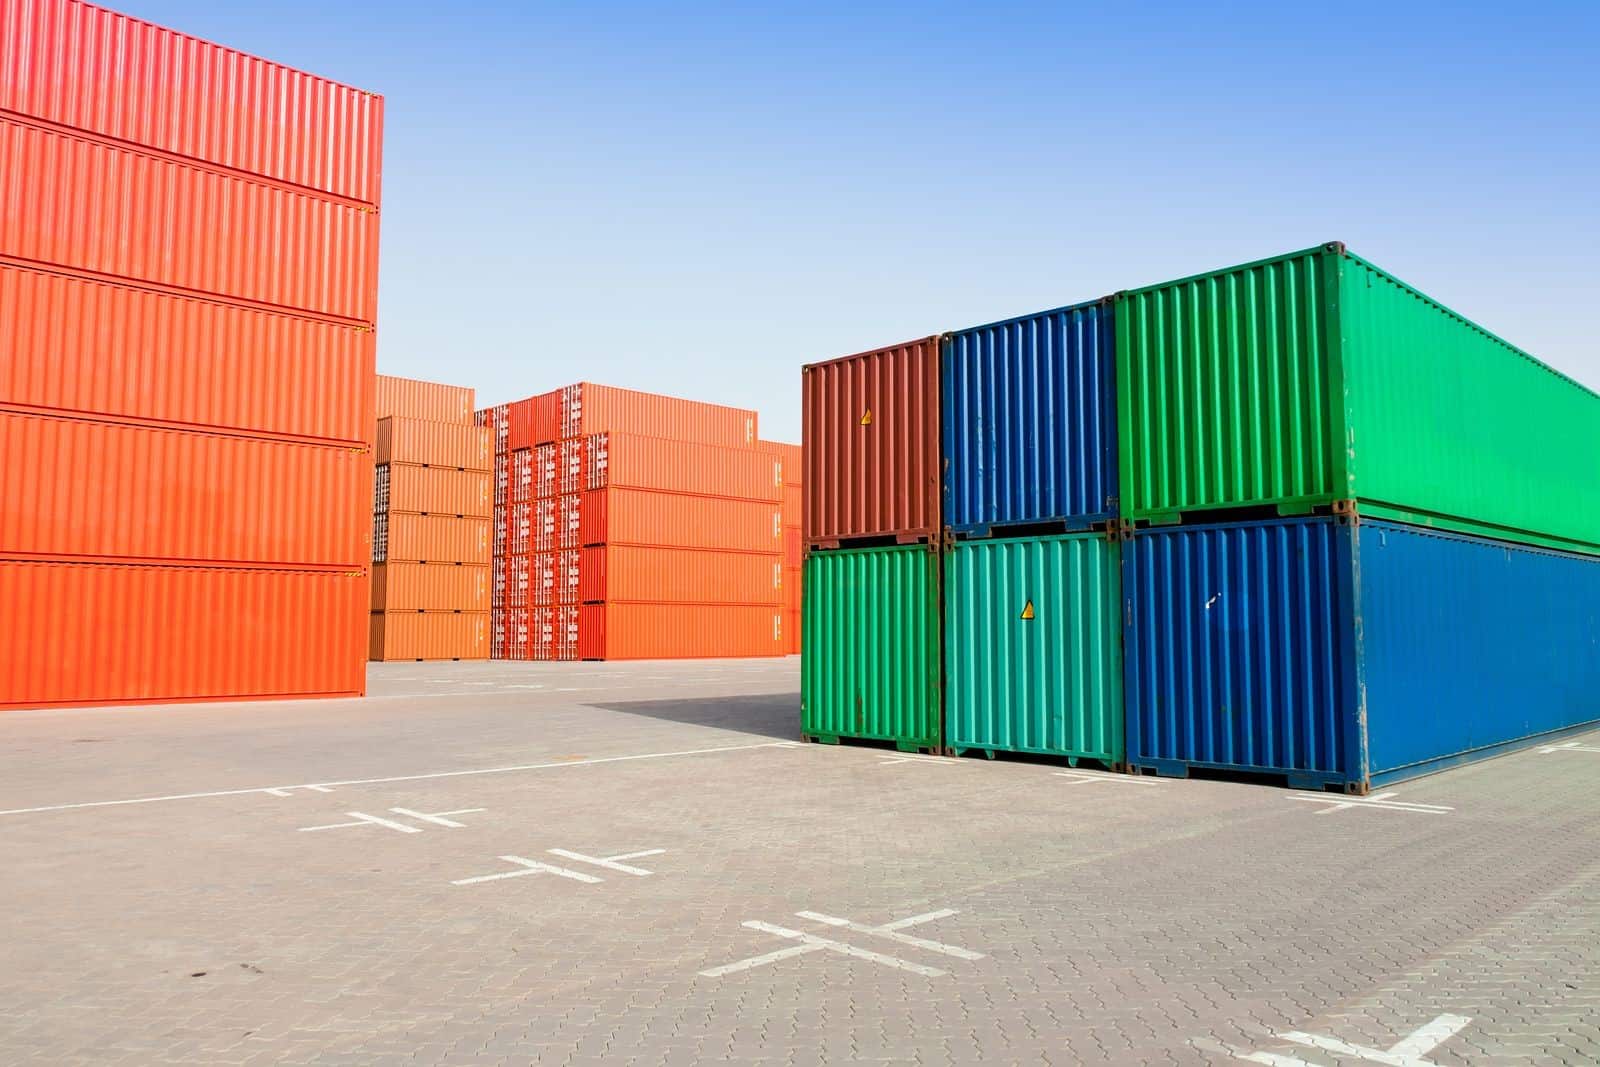 Tips When Searching for High Quality Used Storage Containers for Sale